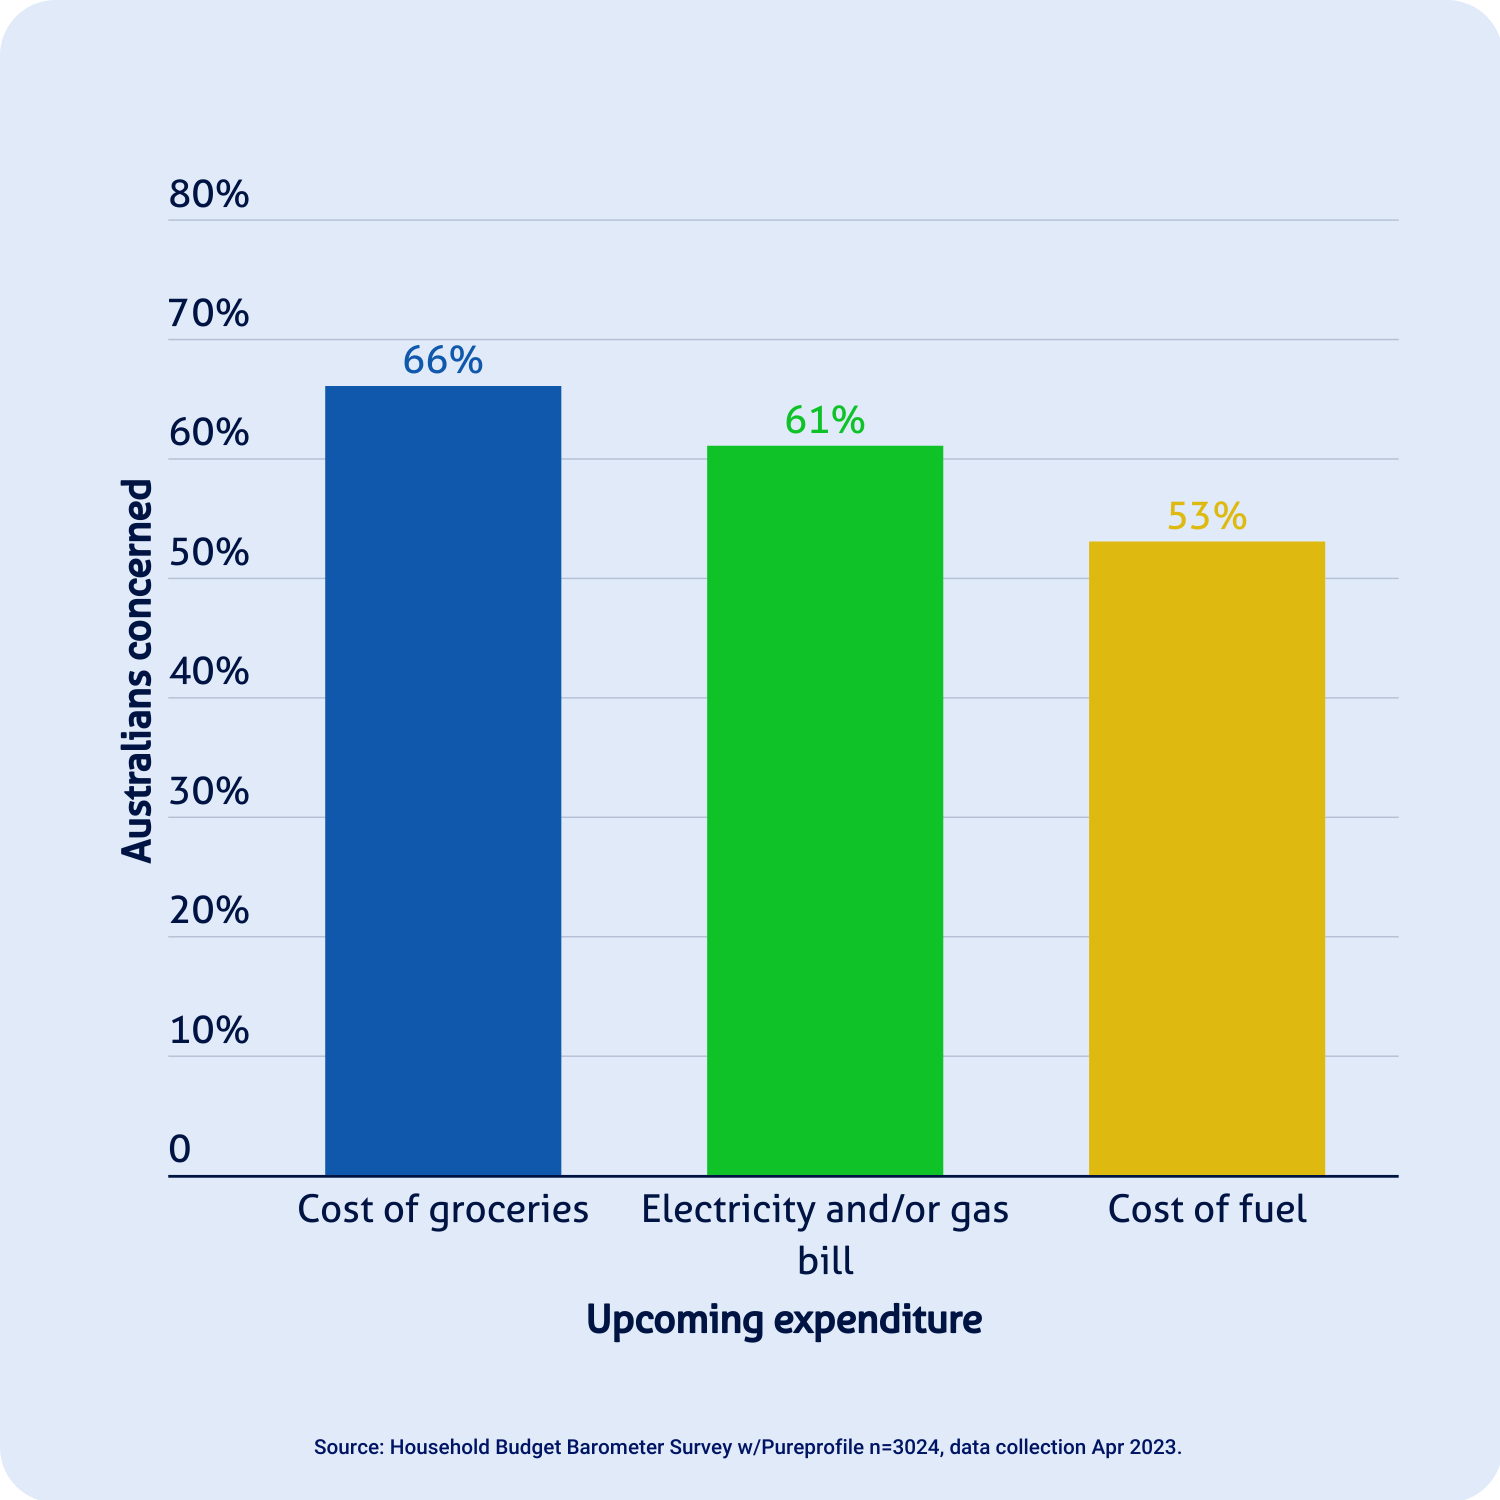 Graph illustrating the percentage of Australians concerned about cost of groceries, electricity and/or gas bills and cost of fuel